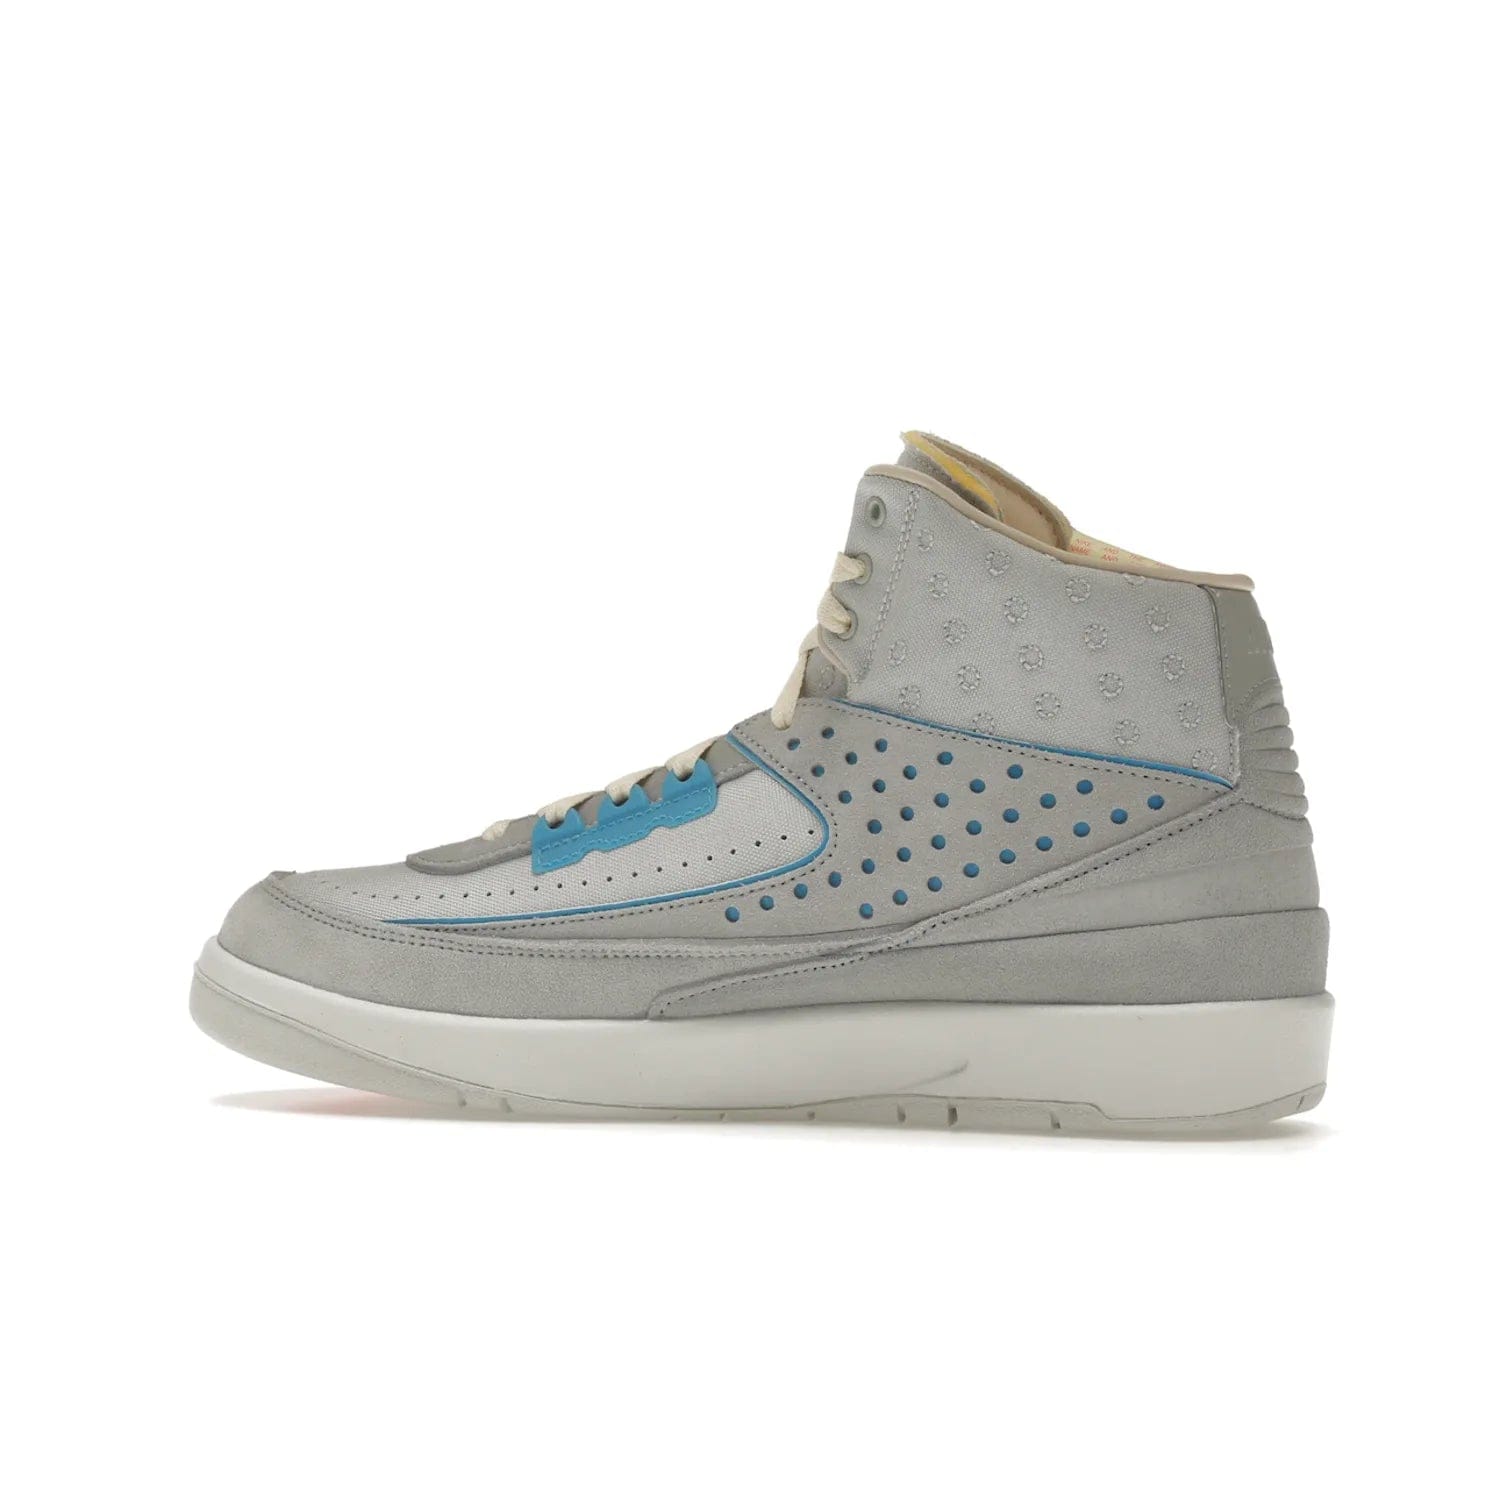 Jordan 2 Retro SP Union Grey Fog - Image 21 - Only at www.BallersClubKickz.com - Introducing the Air Jordan 2 Retro SP Union Grey Fog. This intricate sneaker design features a grey canvas upper with light blue eyelets, eyestay patches, and piping, plus custom external tags. Dropping in April 2022, this exclusive release offers a worn-in look and feel.